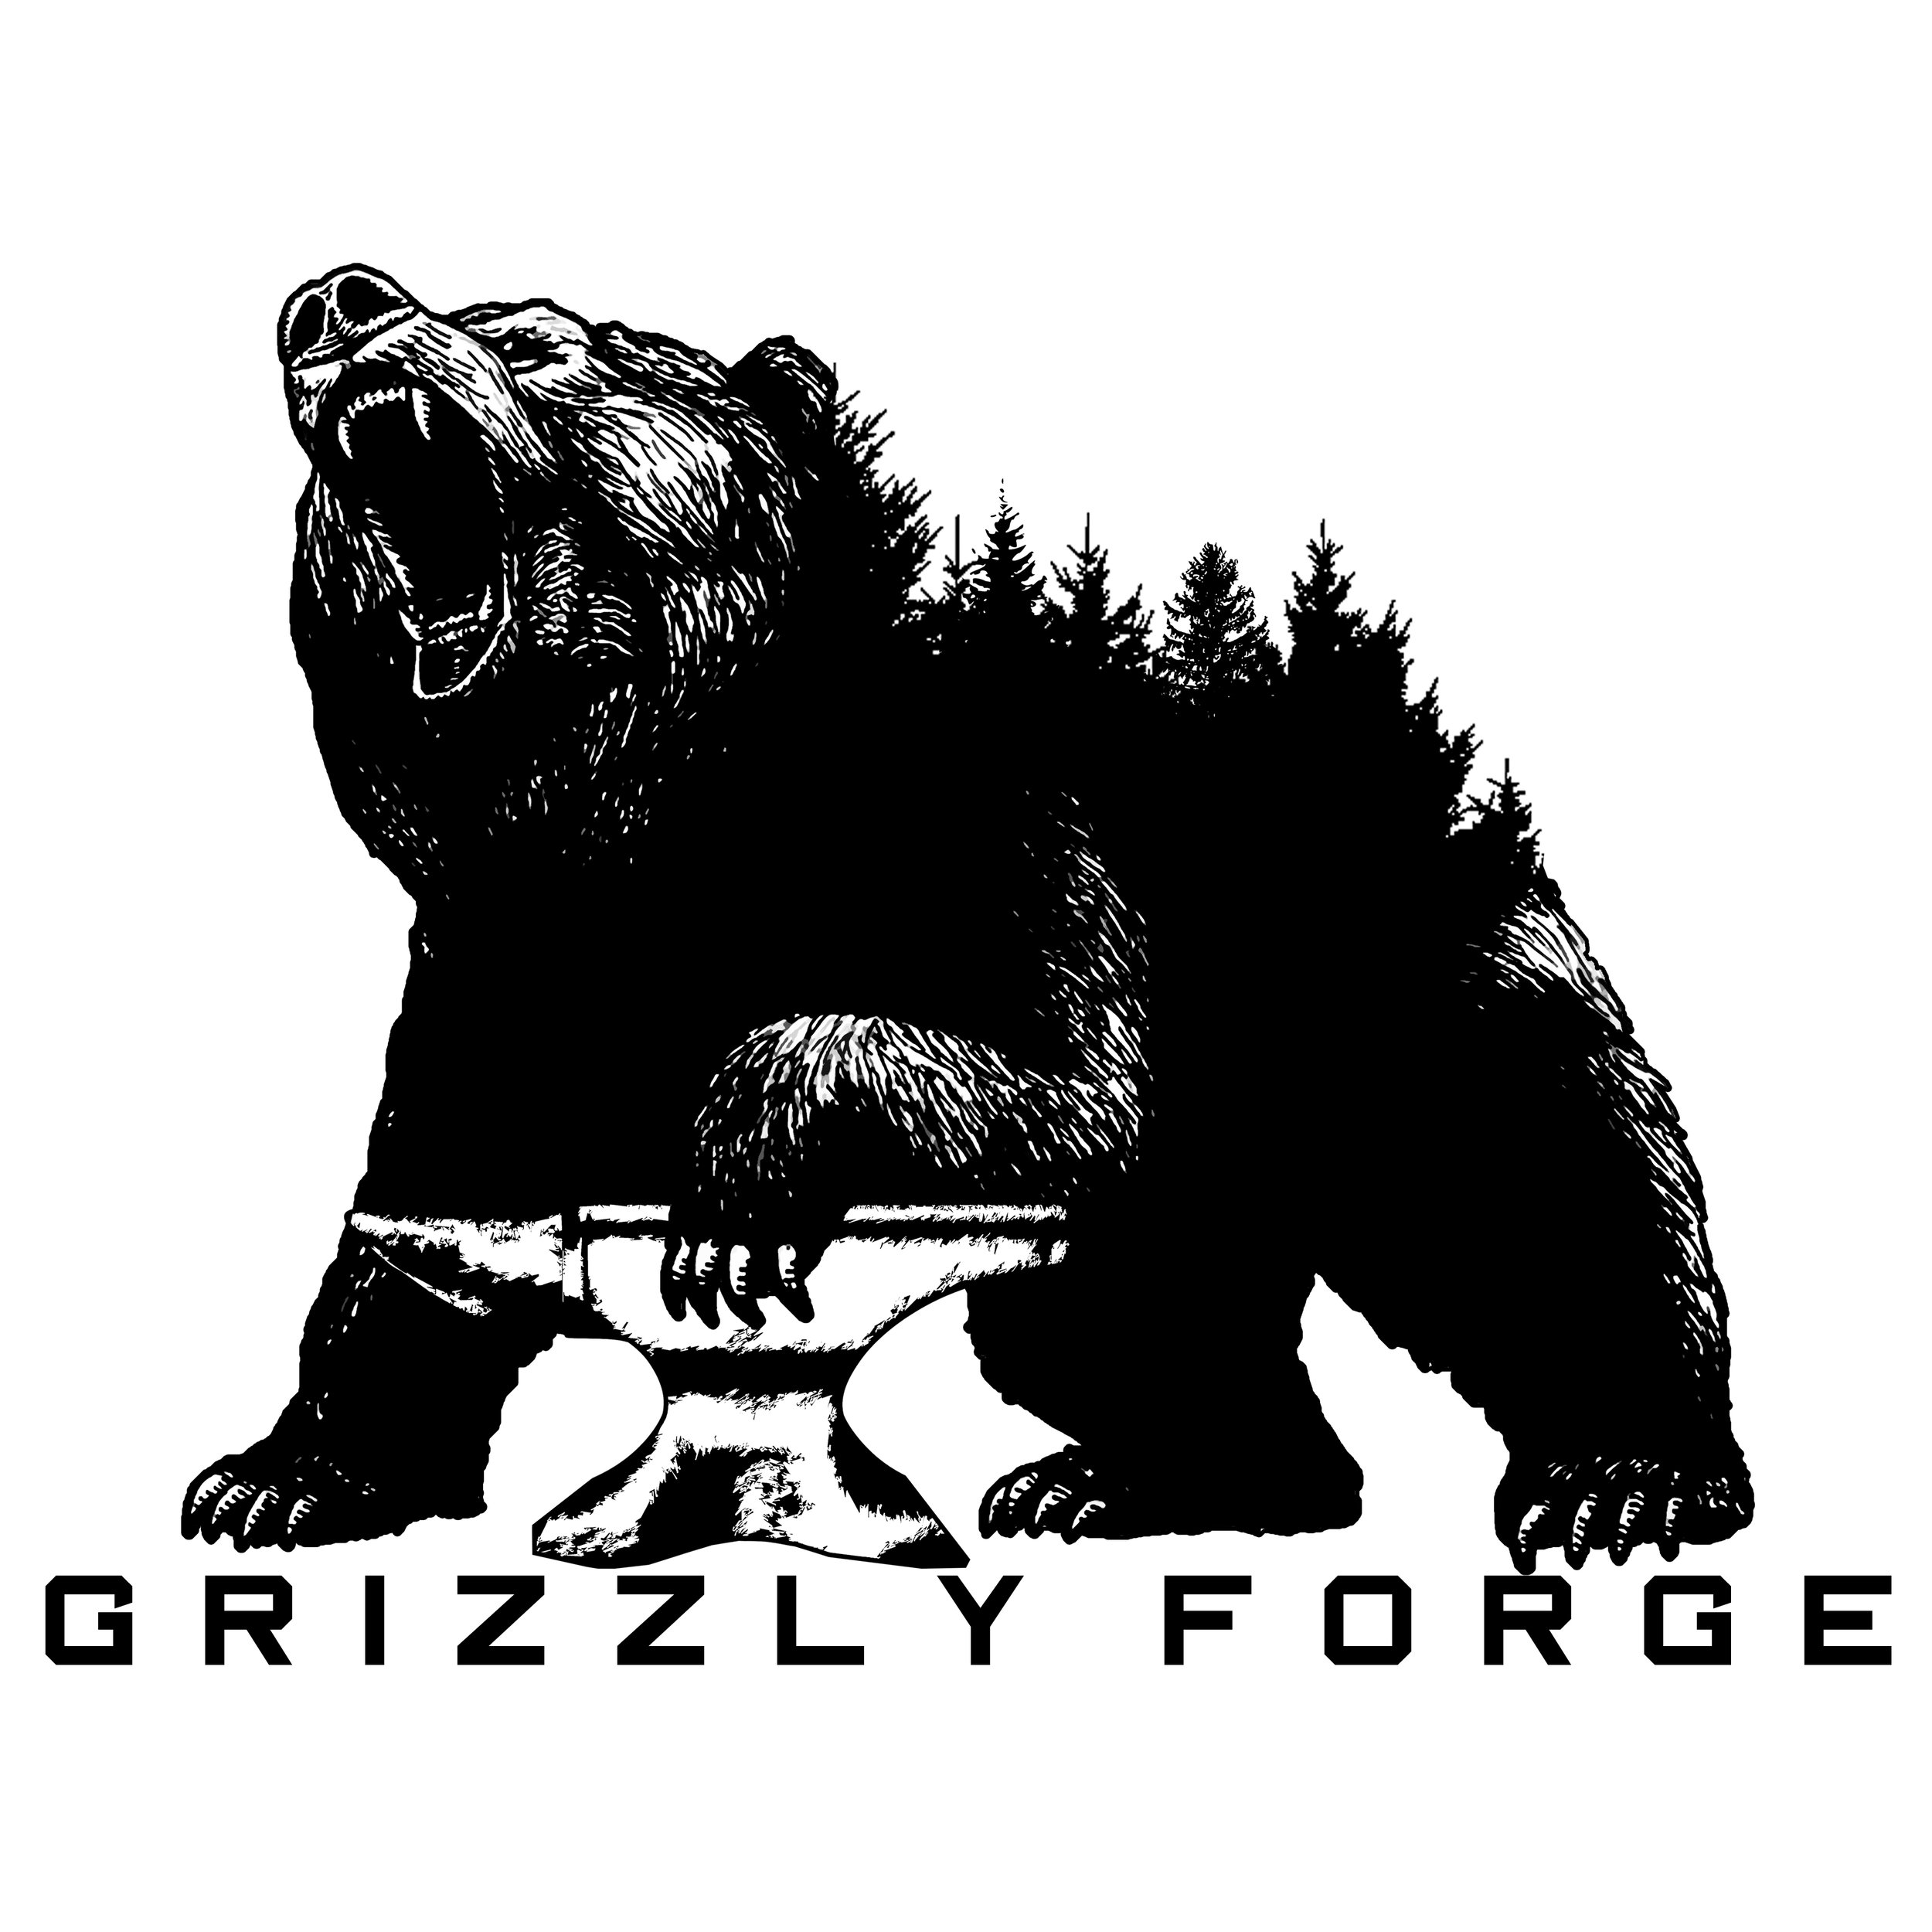 GRIZZLY FORGE